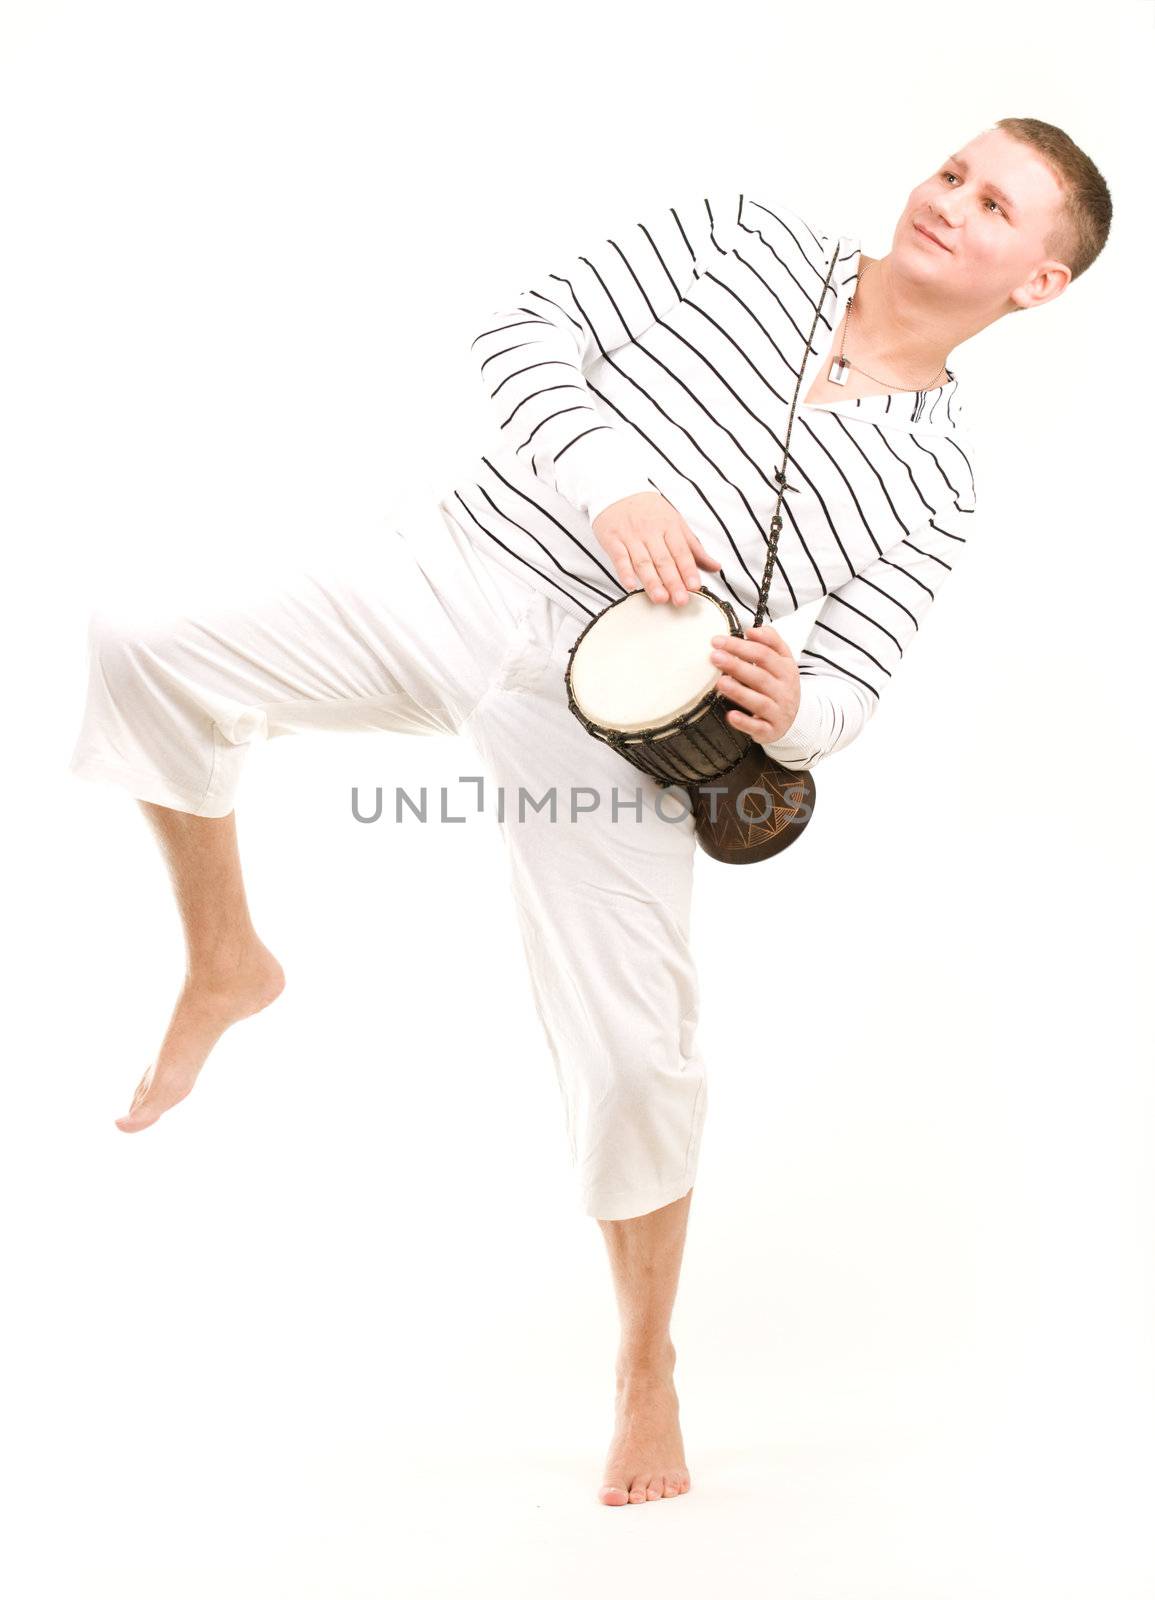 Dancing boy with tambourine by mihhailov